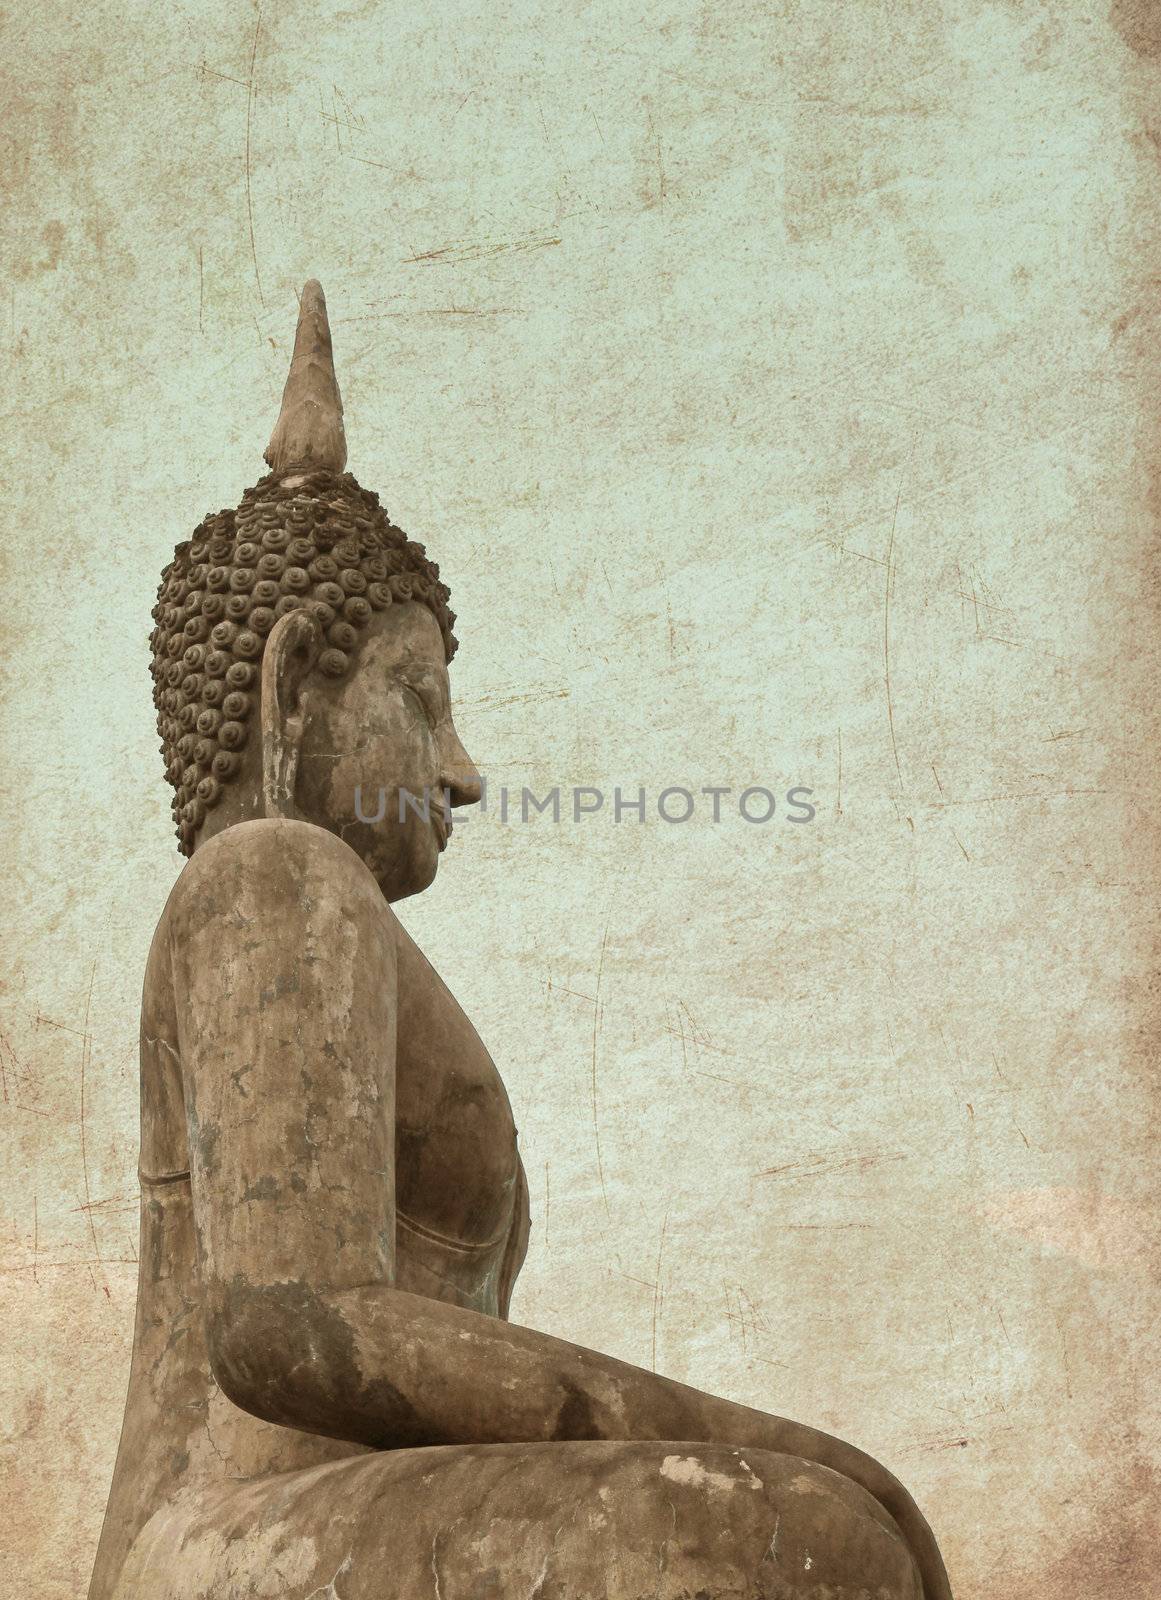 Buddha Statue in Wat Mahathat Temple inThailand, photo in old image style